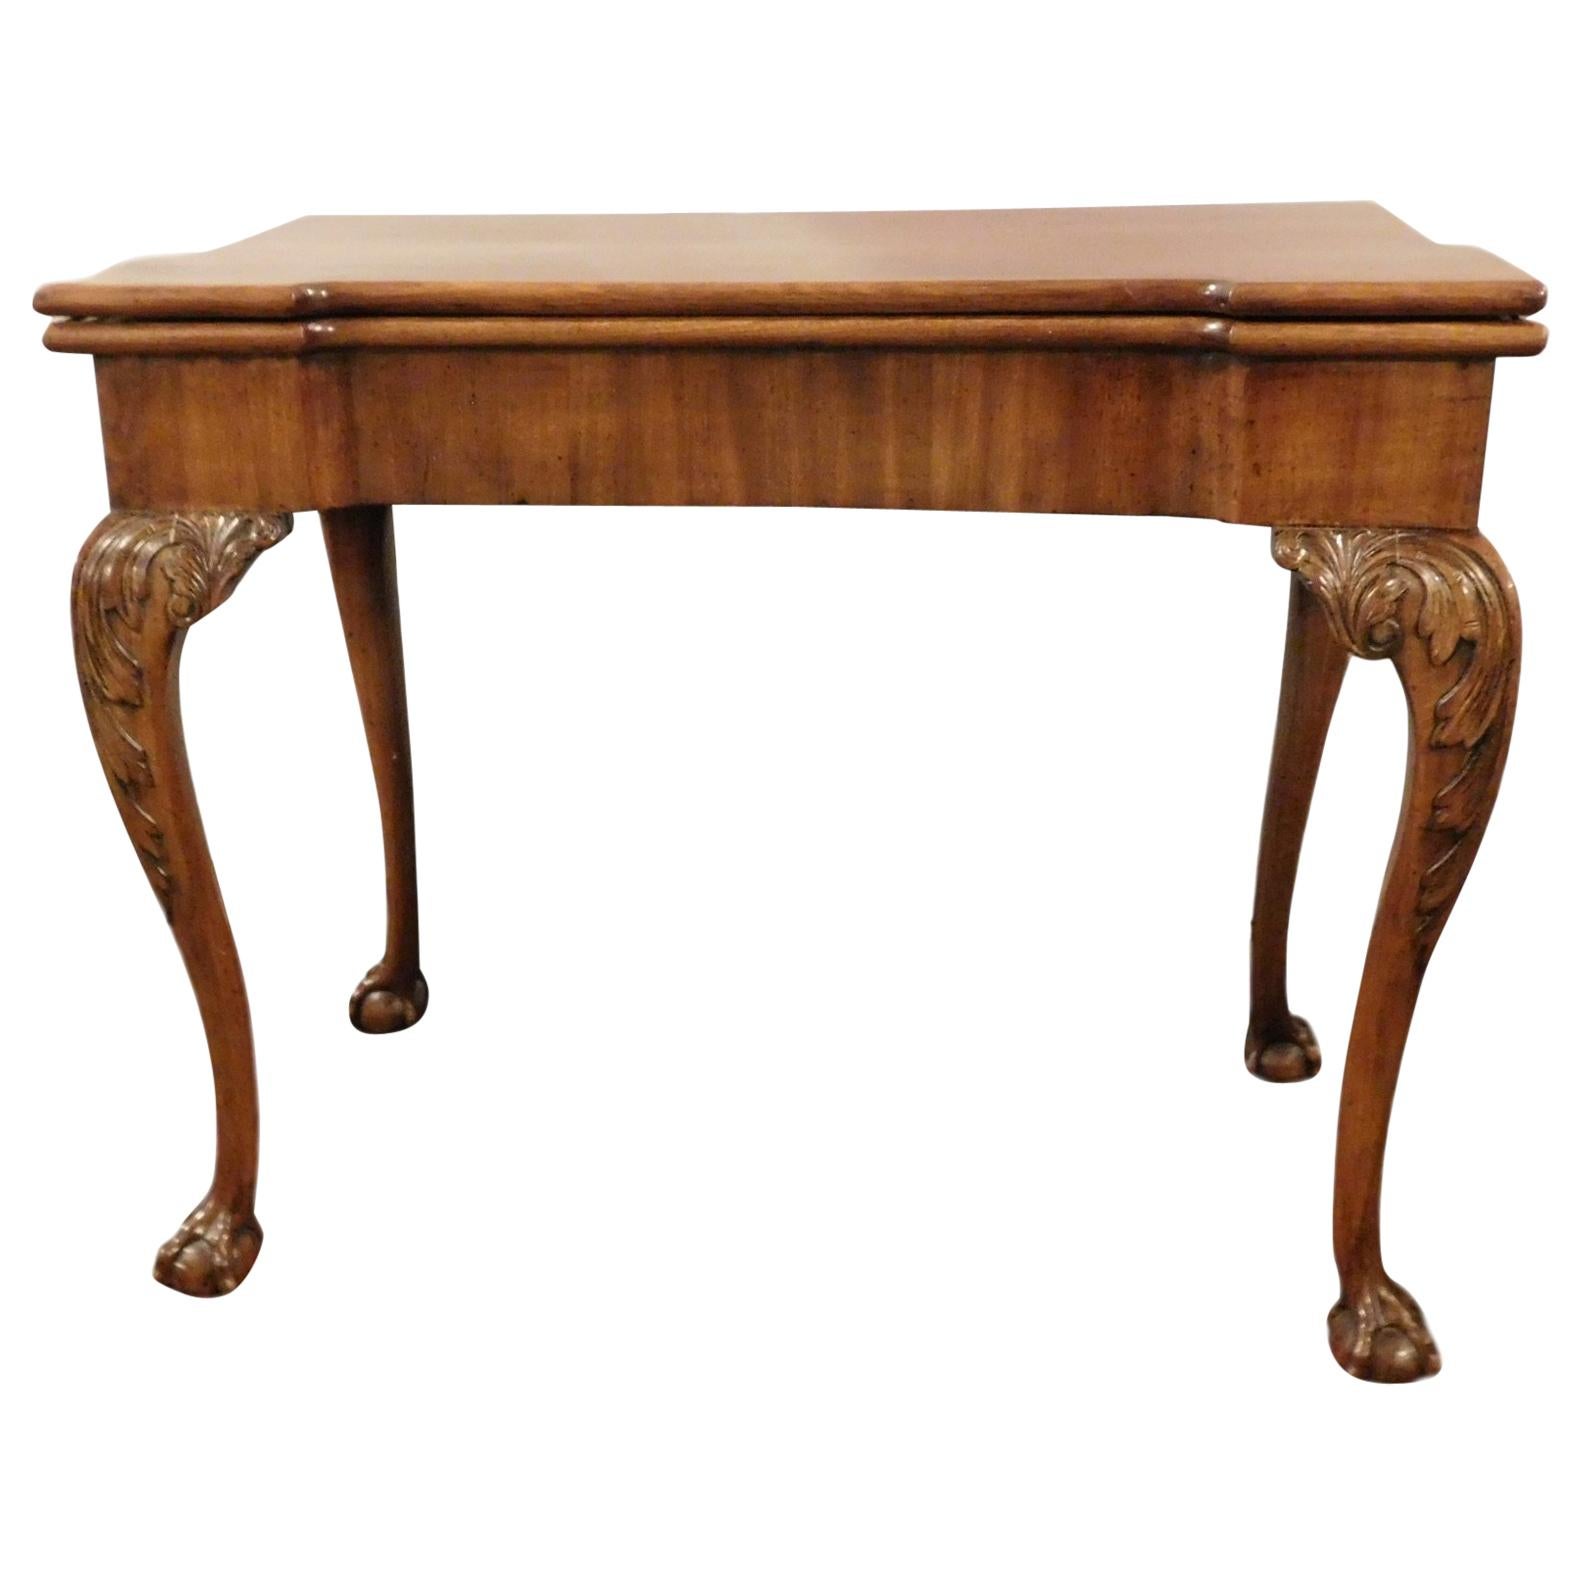 George II Chippendale Period Mahogany Concertina Action Card Table, England 1755 For Sale